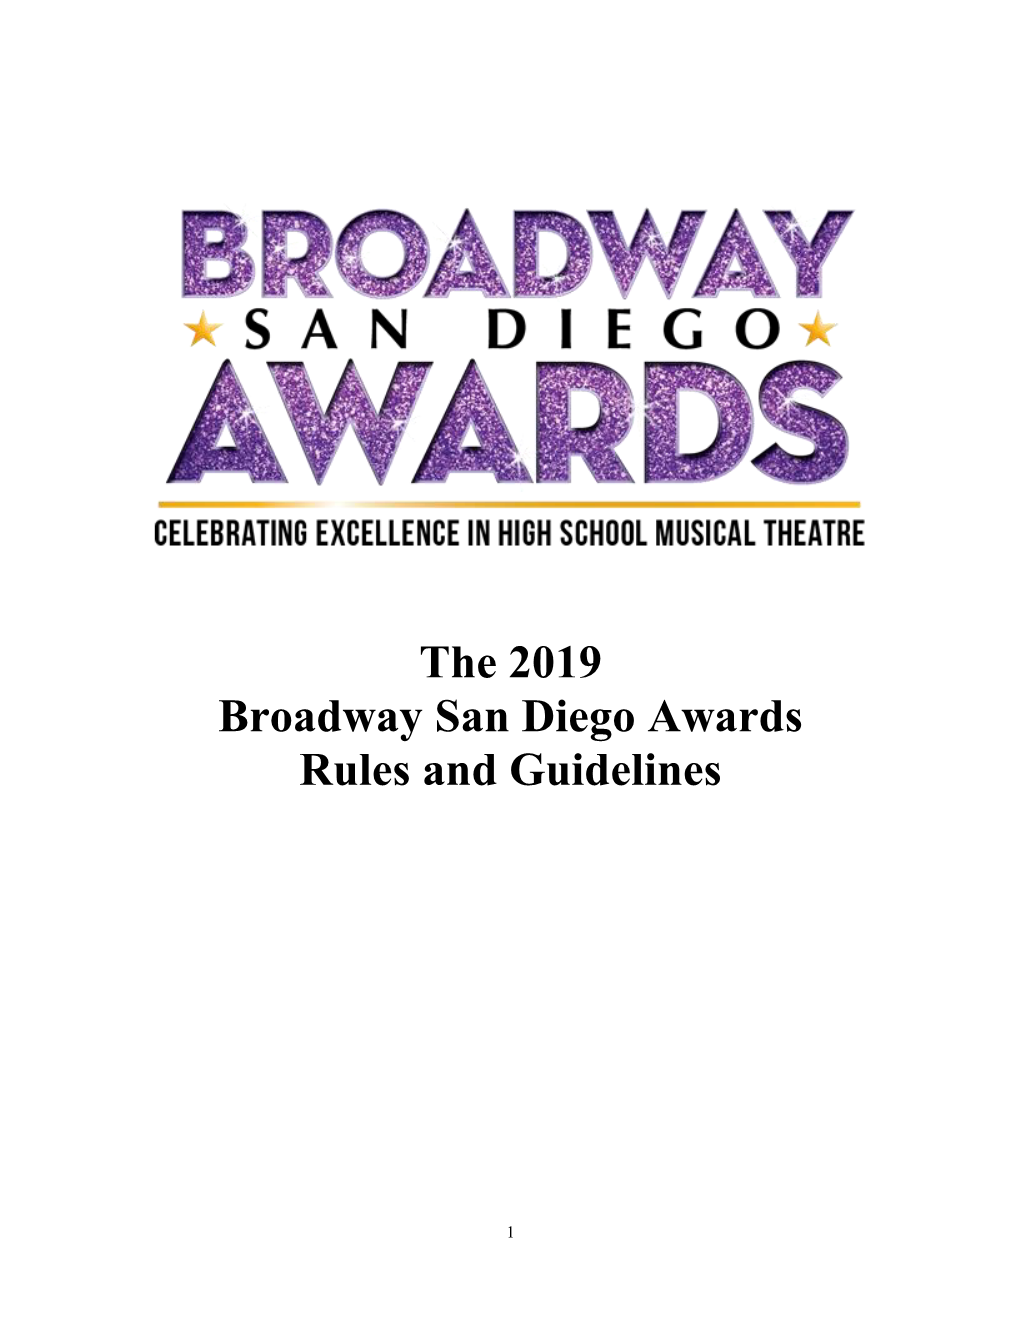 The 2019 Broadway San Diego Awards Rules and Guidelines